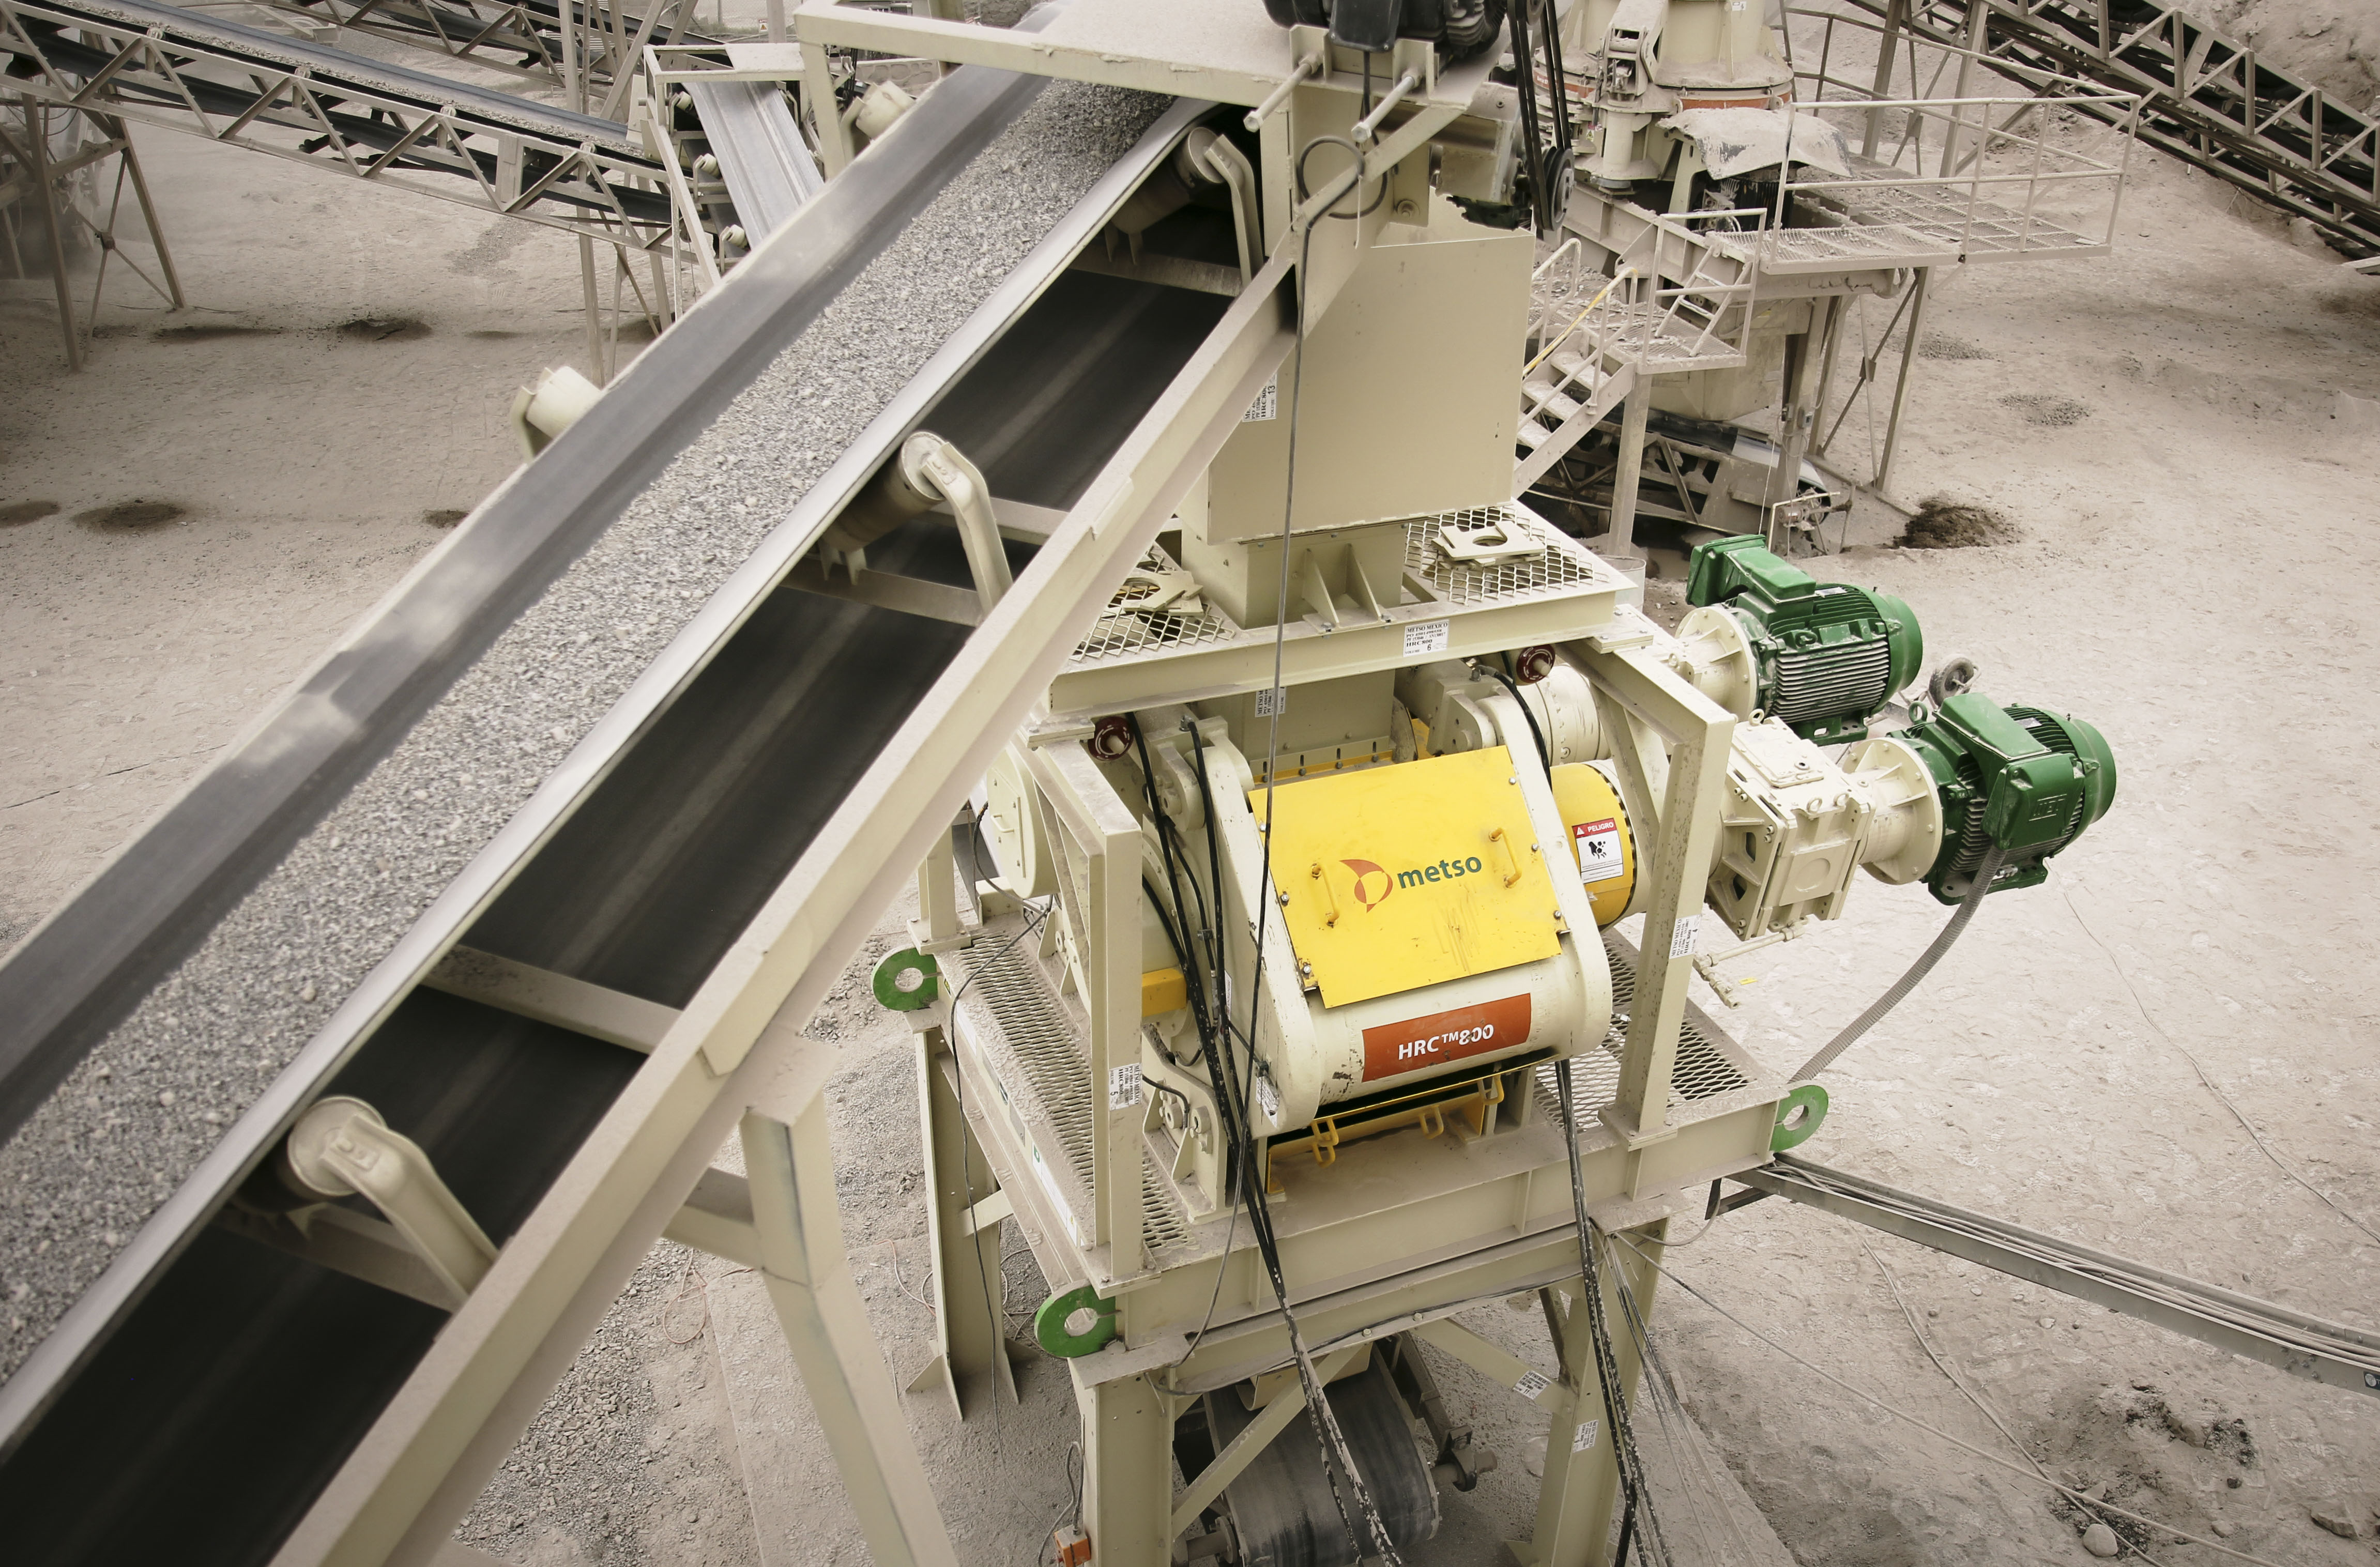 The smaller HPGR models, HRC™ 8 and HRC™ 800, are specifically designed to meet the needs of aggregate and industrial minerals applications.